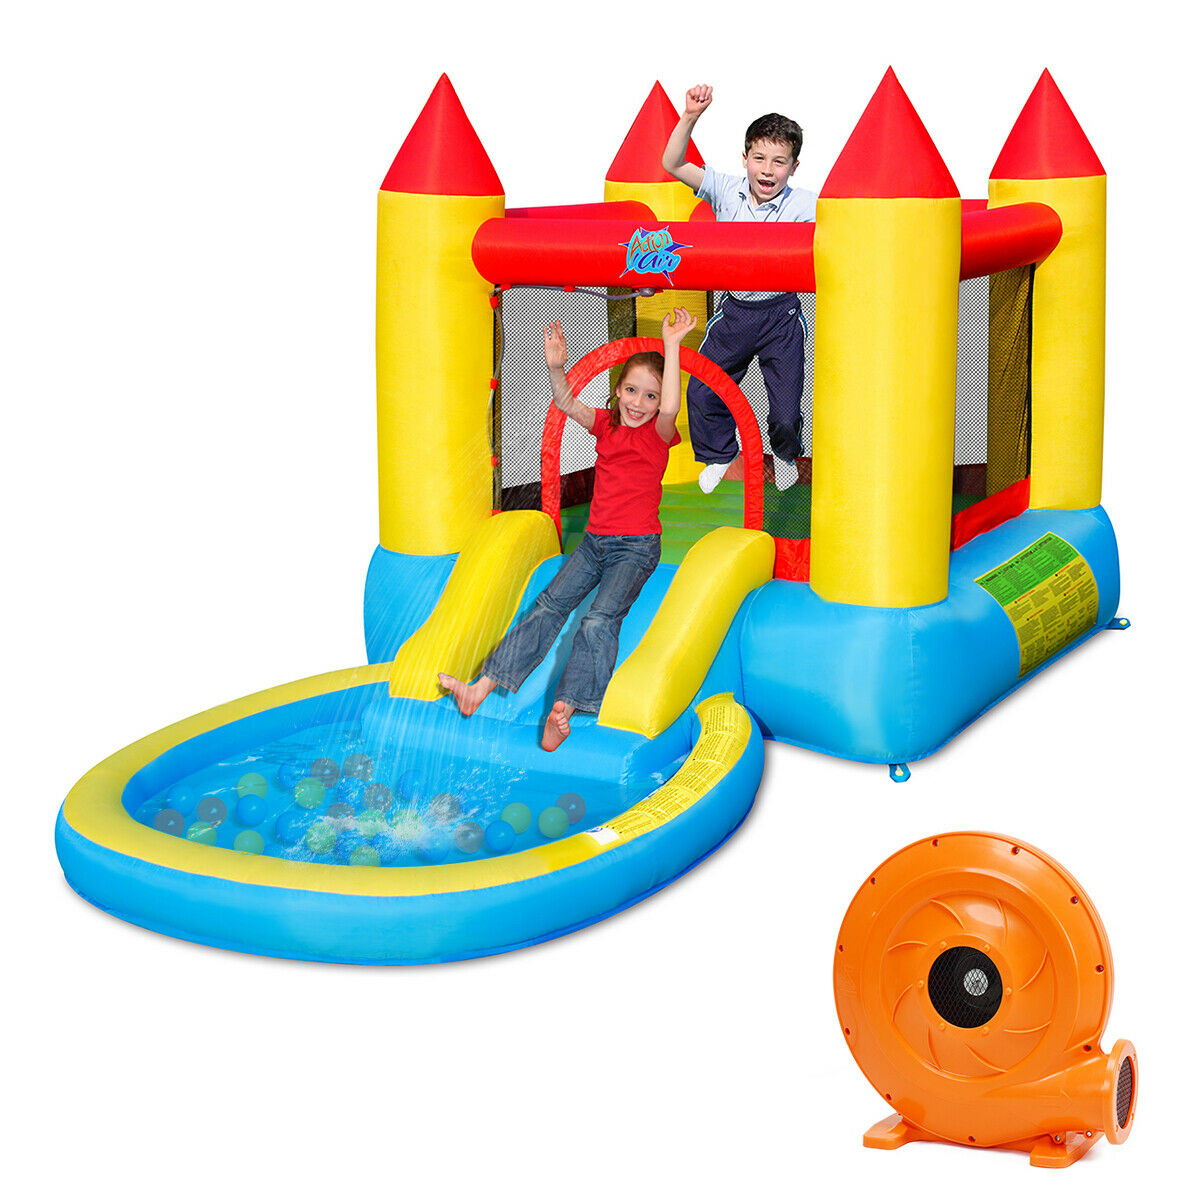 Gymax Inflatable Bounce House Kids Slide Jumping Castle Bouncer w/Pool and 480W Blower - image 1 of 10